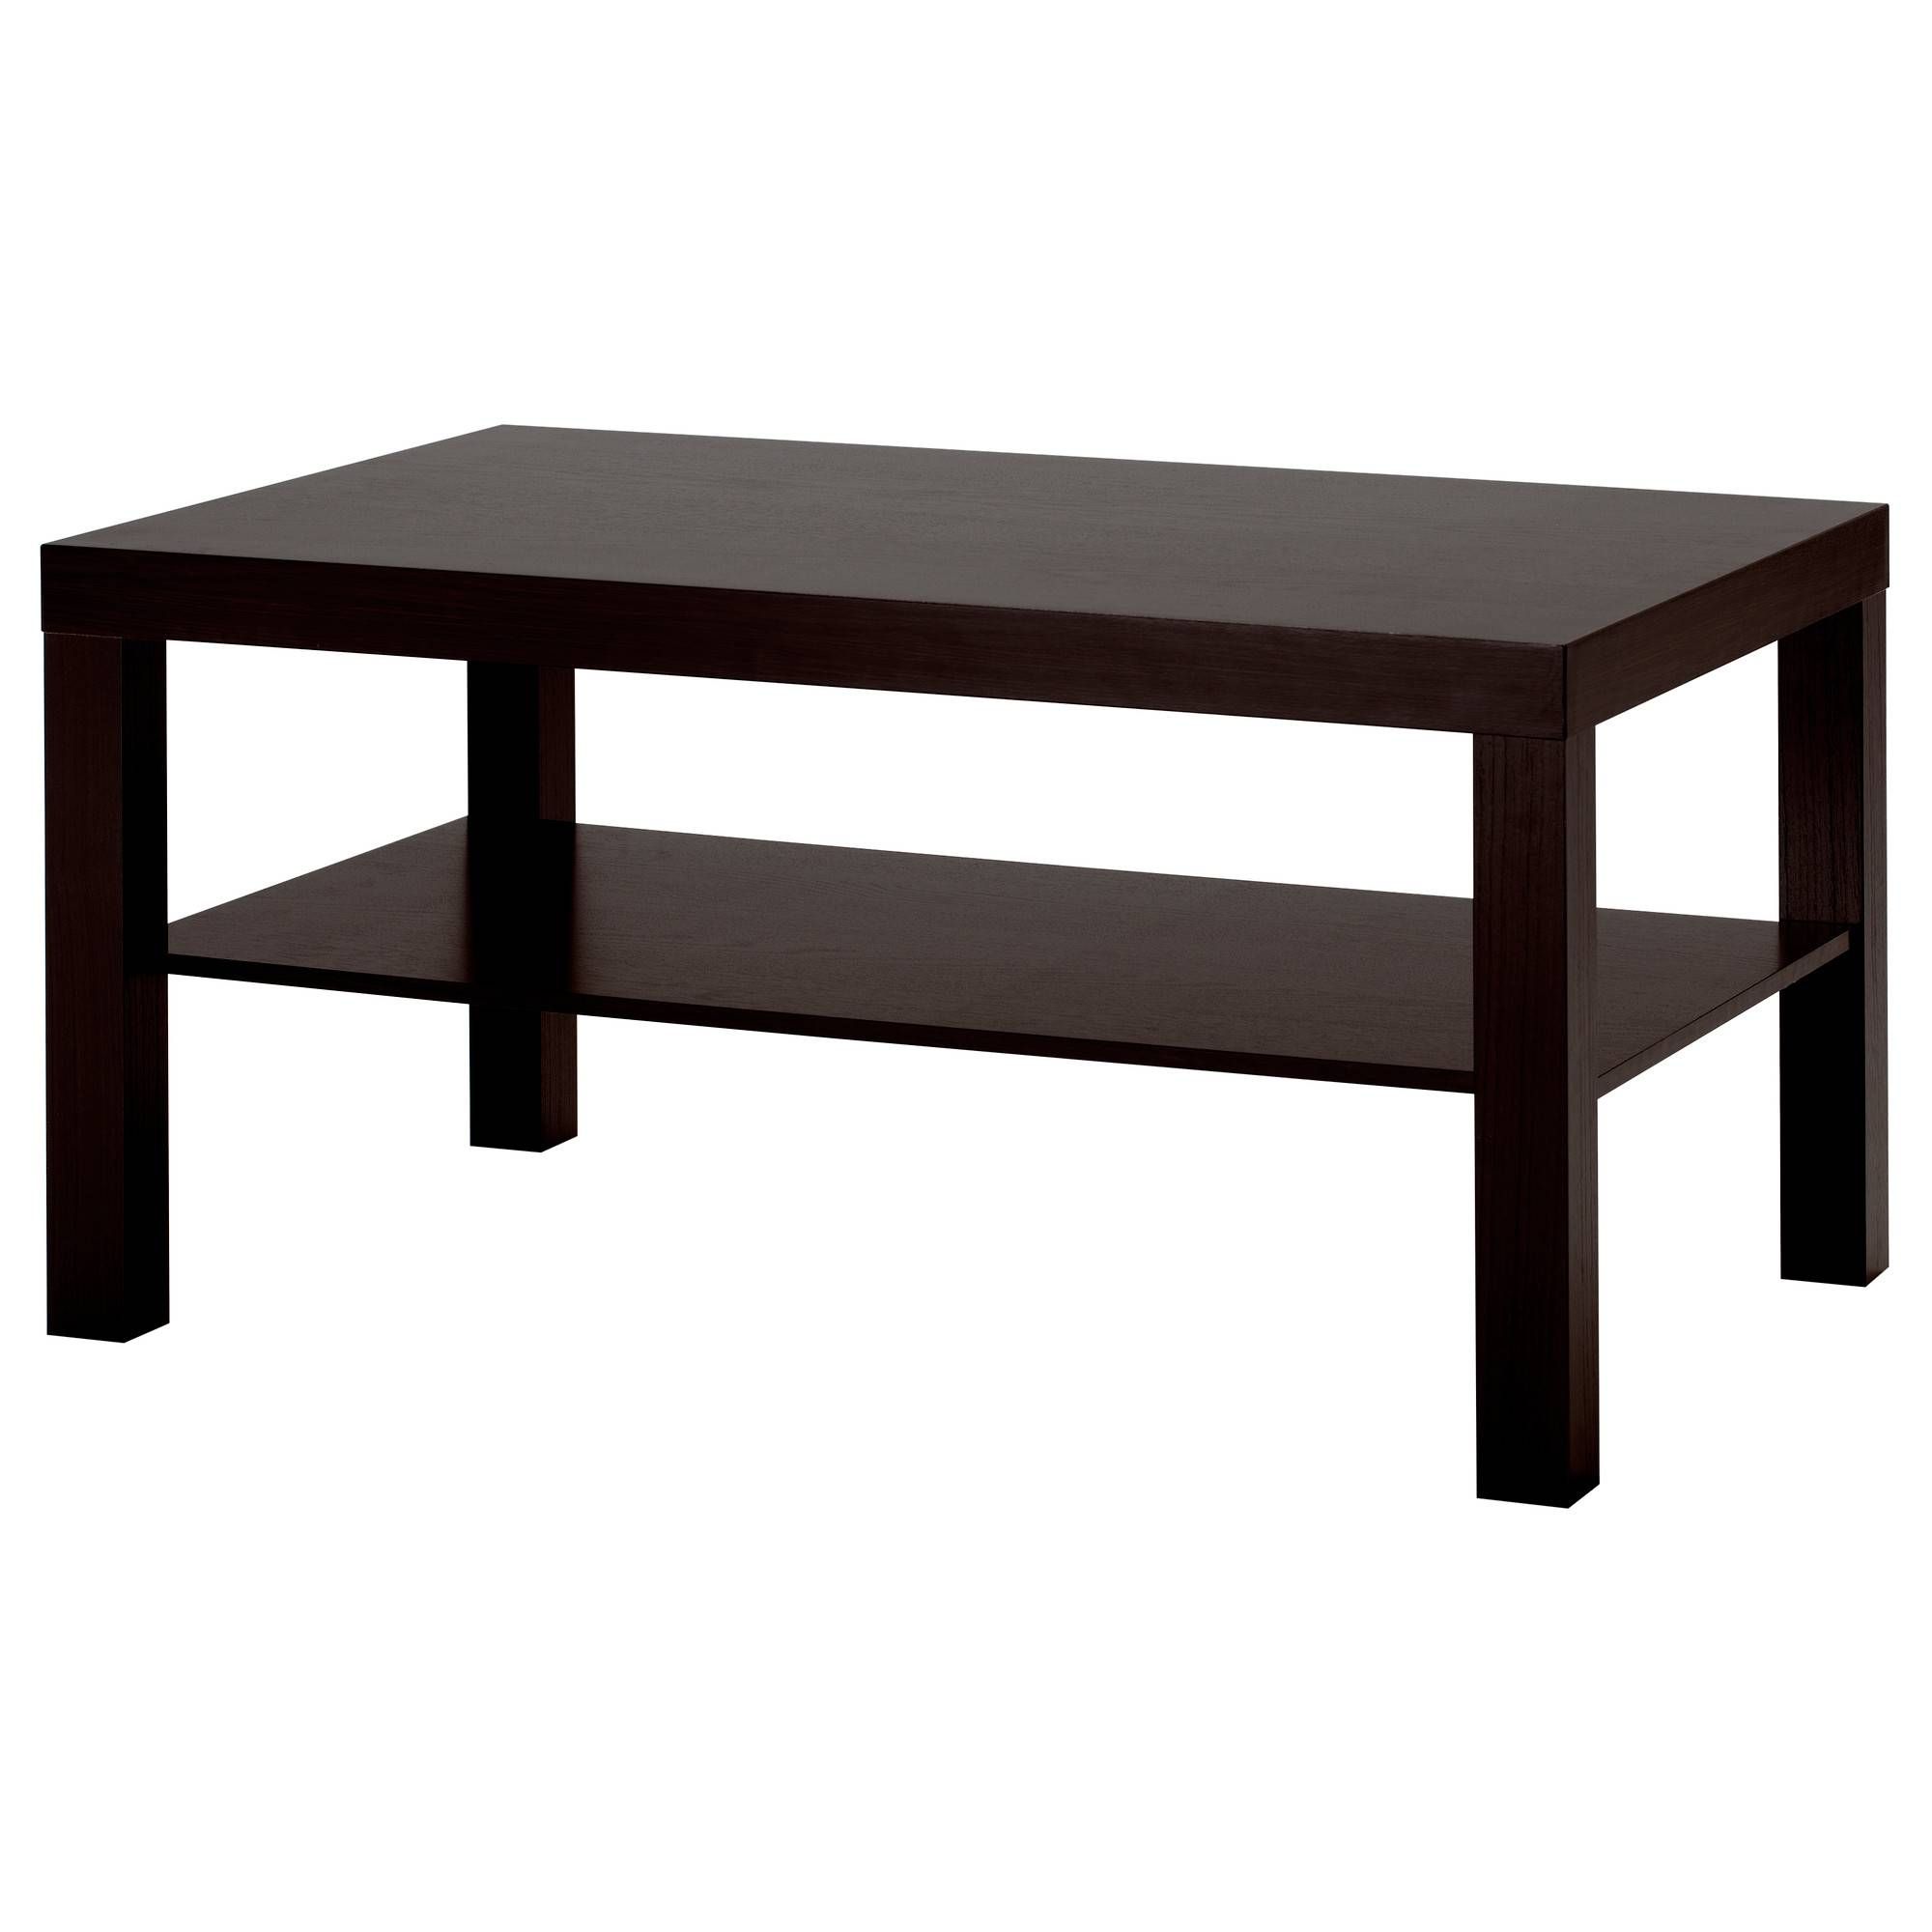 Lack Coffee Table – White, 35x22x18" – Ikea With White And Black Coffee Tables (View 4 of 30)